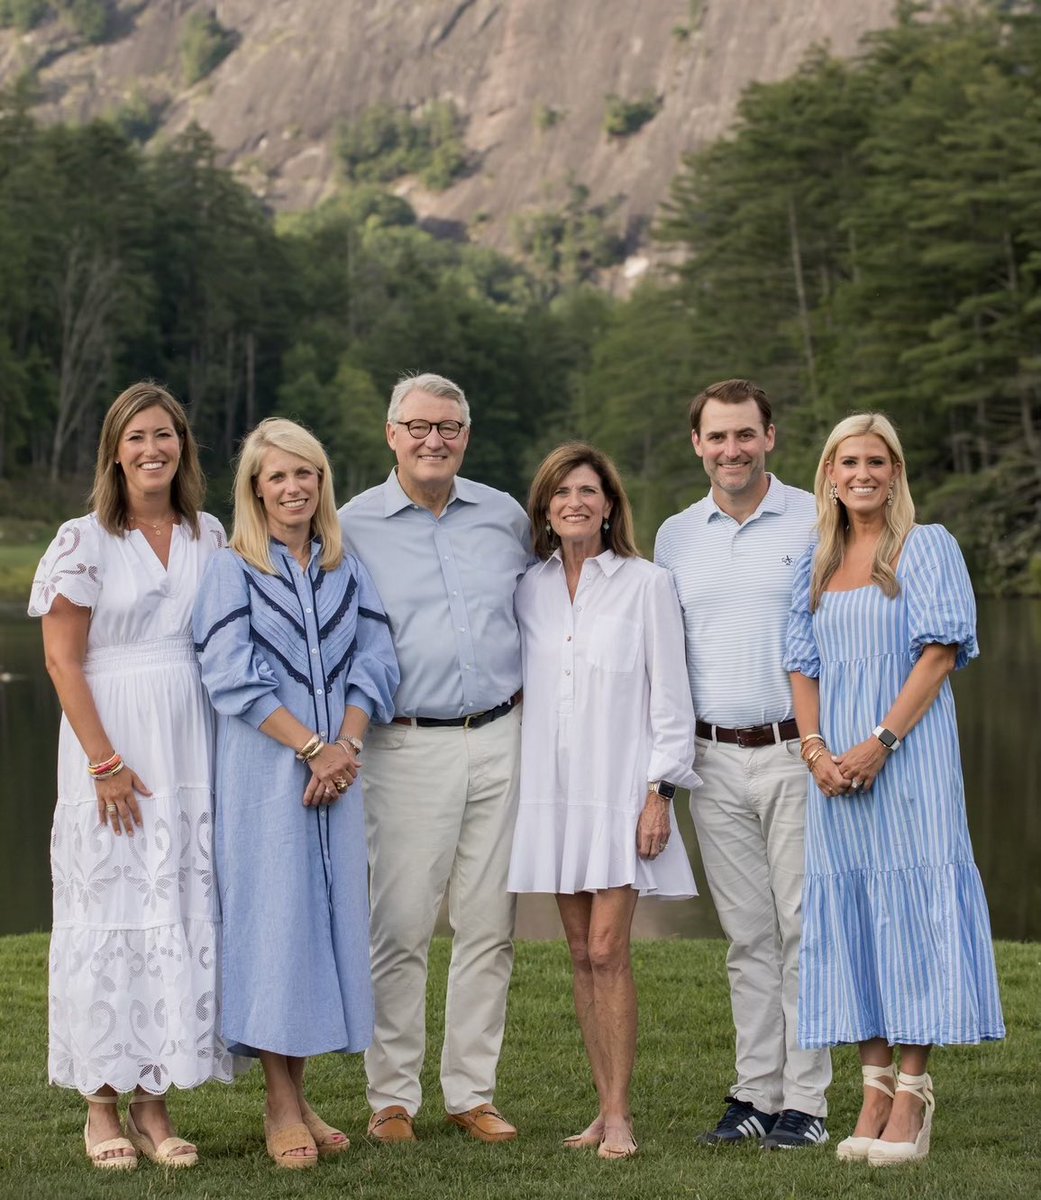 I’d like to wish all mothers in #GA12 a happy and joyful Mother’s day, especially my beautiful wife Robin, my three daughters, and daughter-in-law. Thank you so much for all you do each and every day!